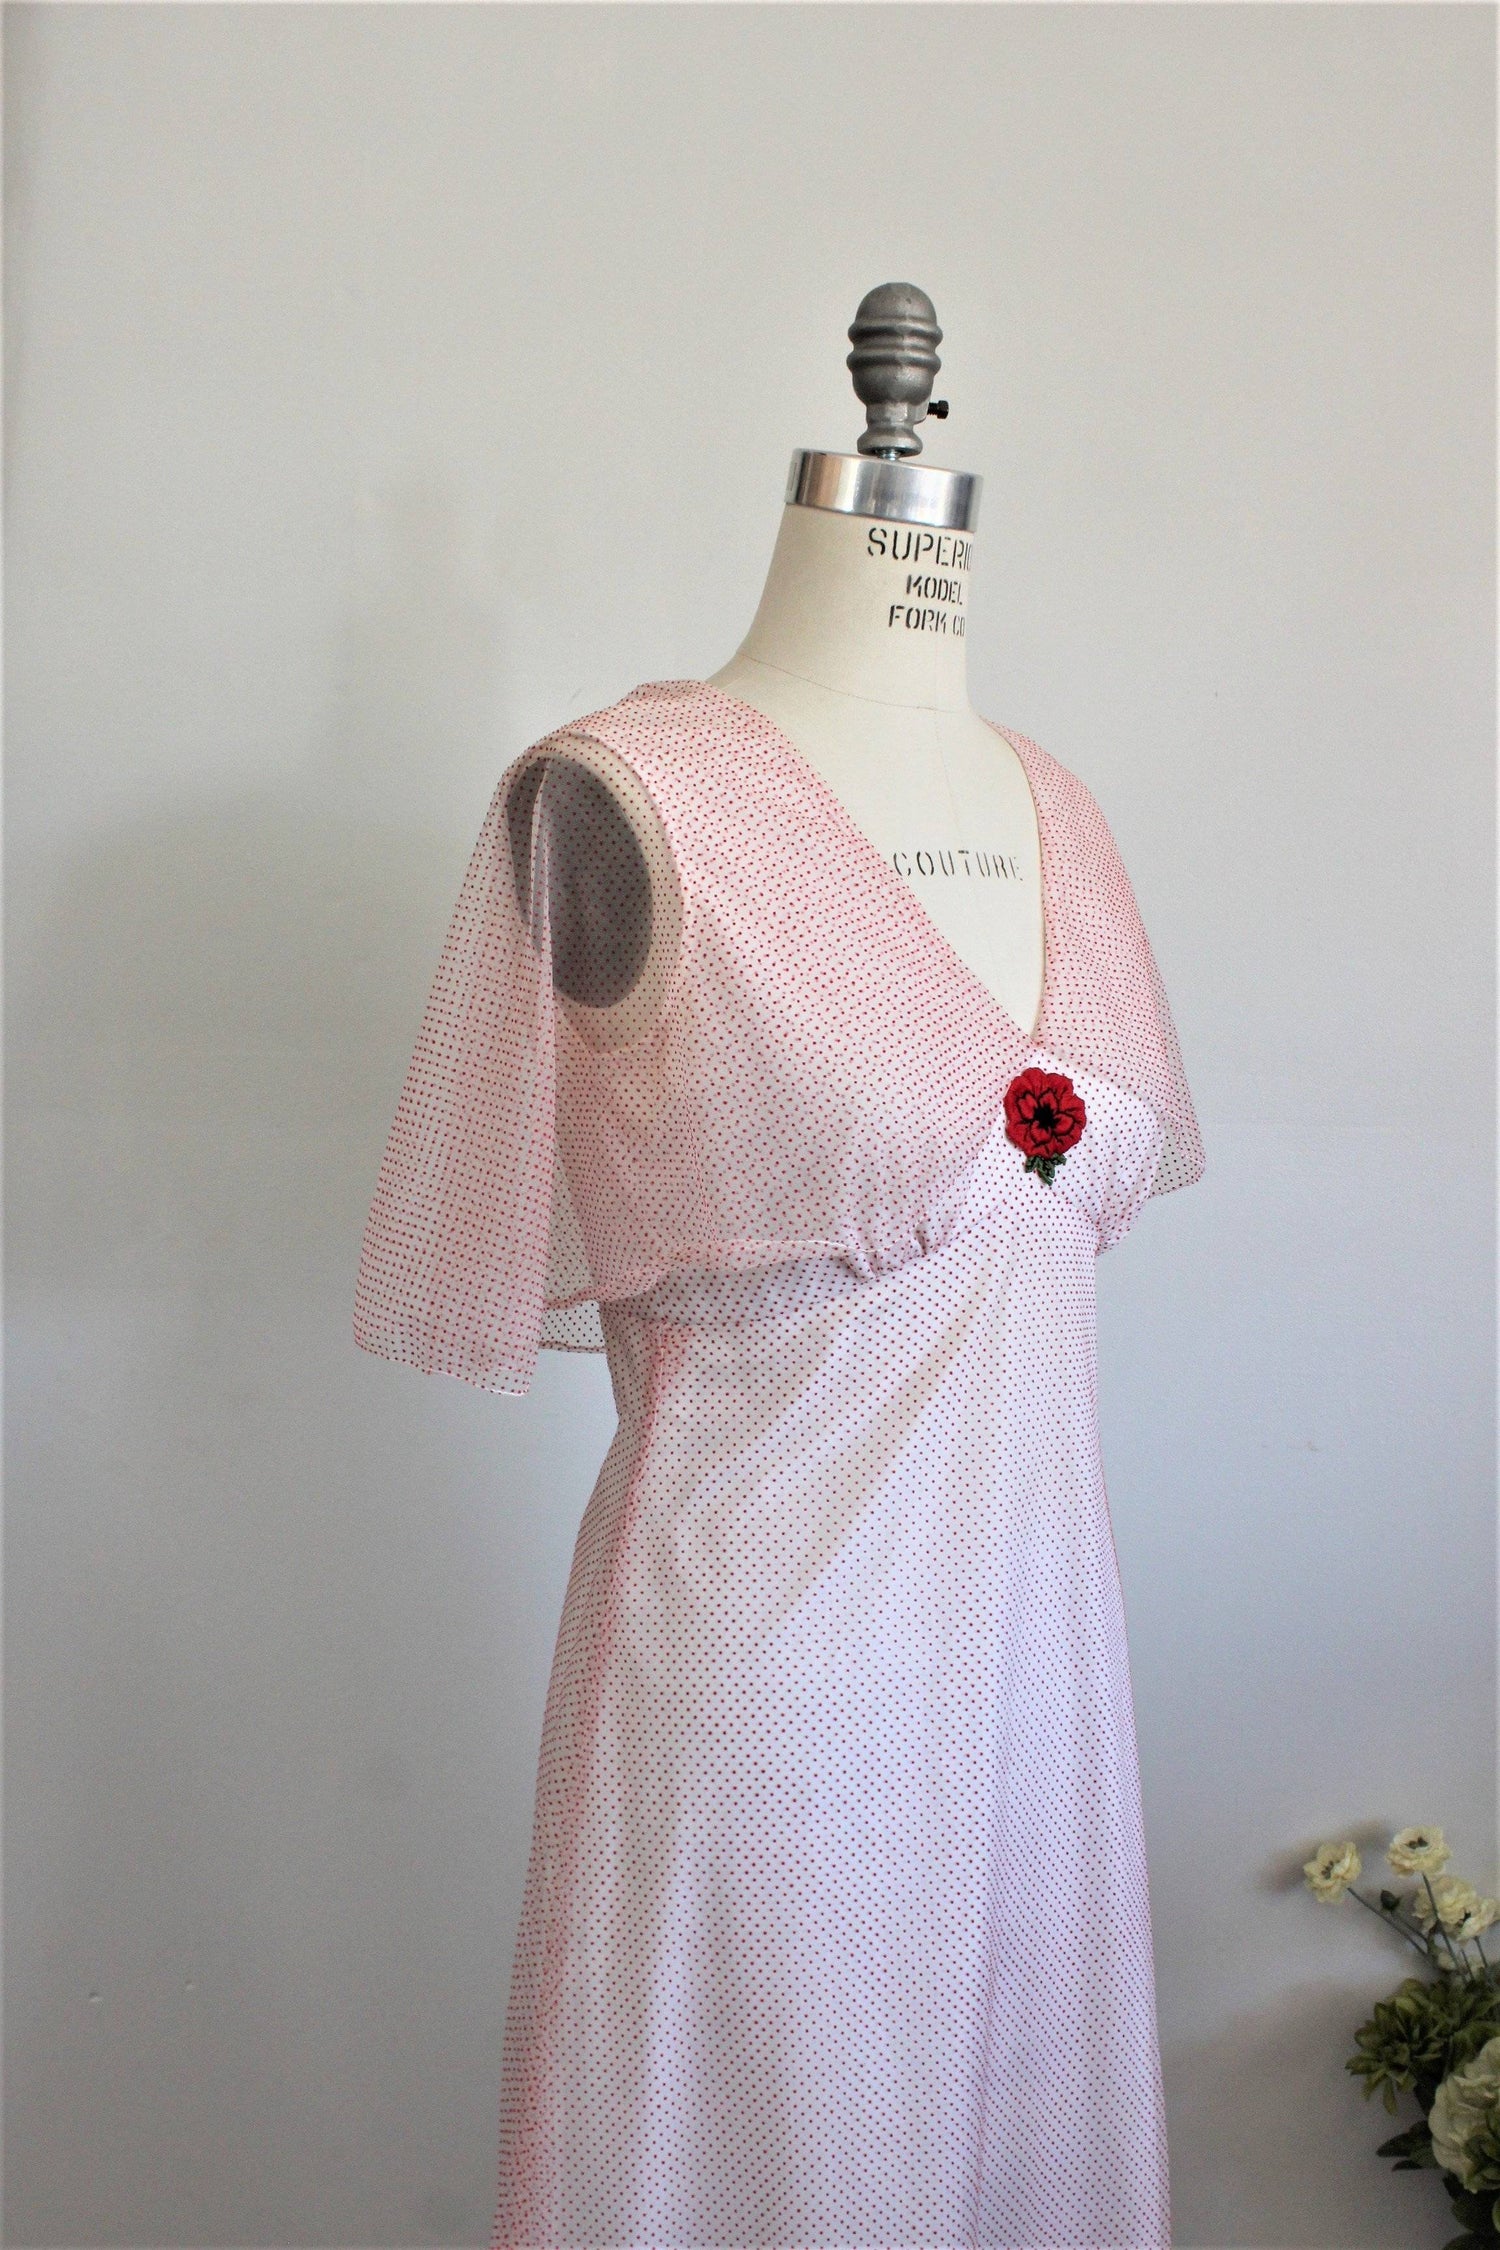 Vintage 1960s Full Length Party Dress, Red and White Polkadots-Toadstool Farm Vintage-1940s Dress,40s Clothing,40s Dress,40s Formal Dress,Full Length Dress,Metal Zipper,Party DRess,Polka Dots,Polkadot,Red and White,Ruffled Hem,Vintage,Vintage Clothing,Vintage Dress,Vintage Dresses